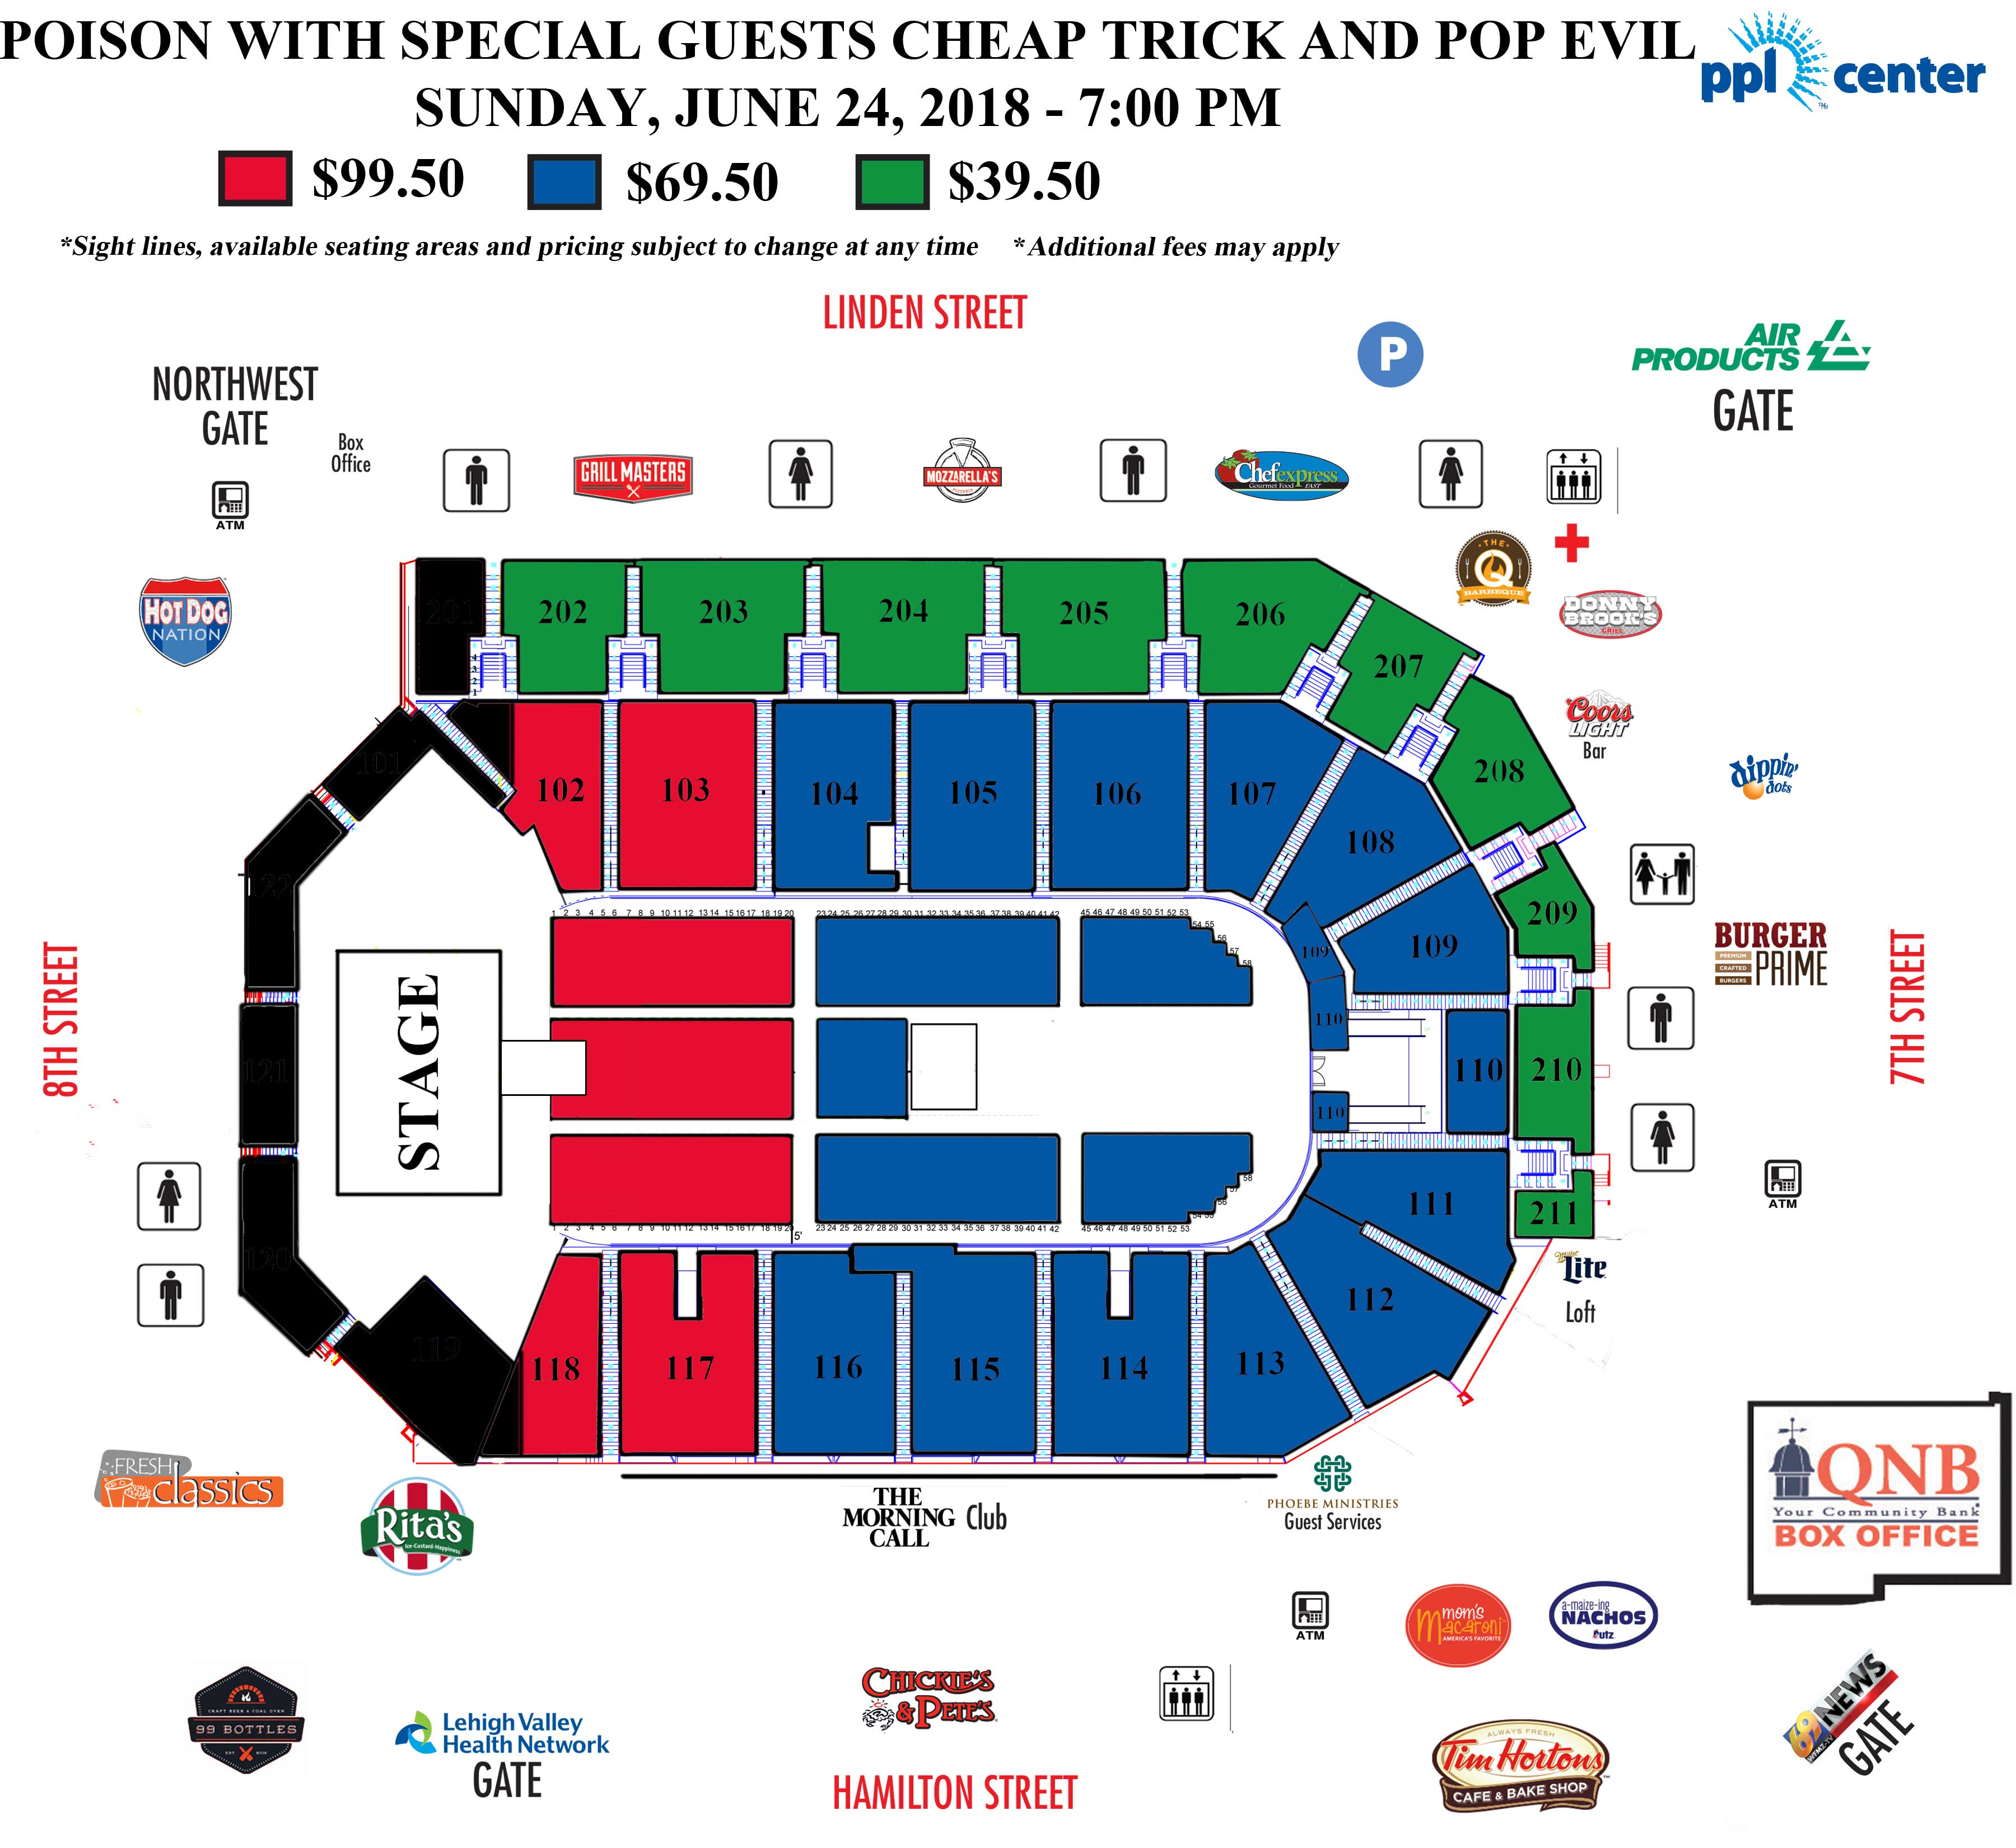 Ppl Center Seating Chart Allentown Pa